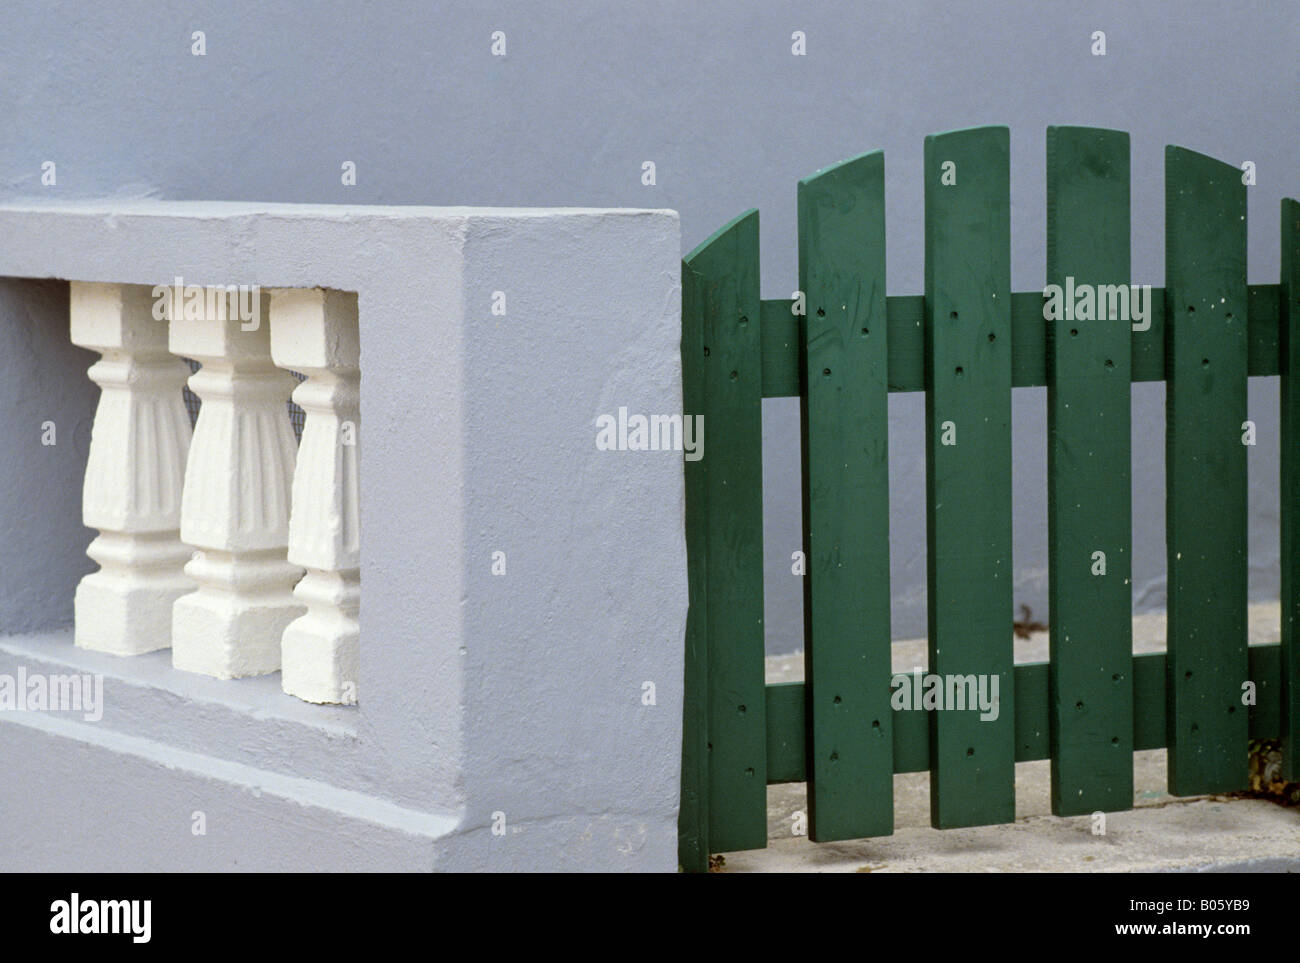 geometric shapes with green gate and balustrade outside house in  St George's, Bermuda Stock Photo